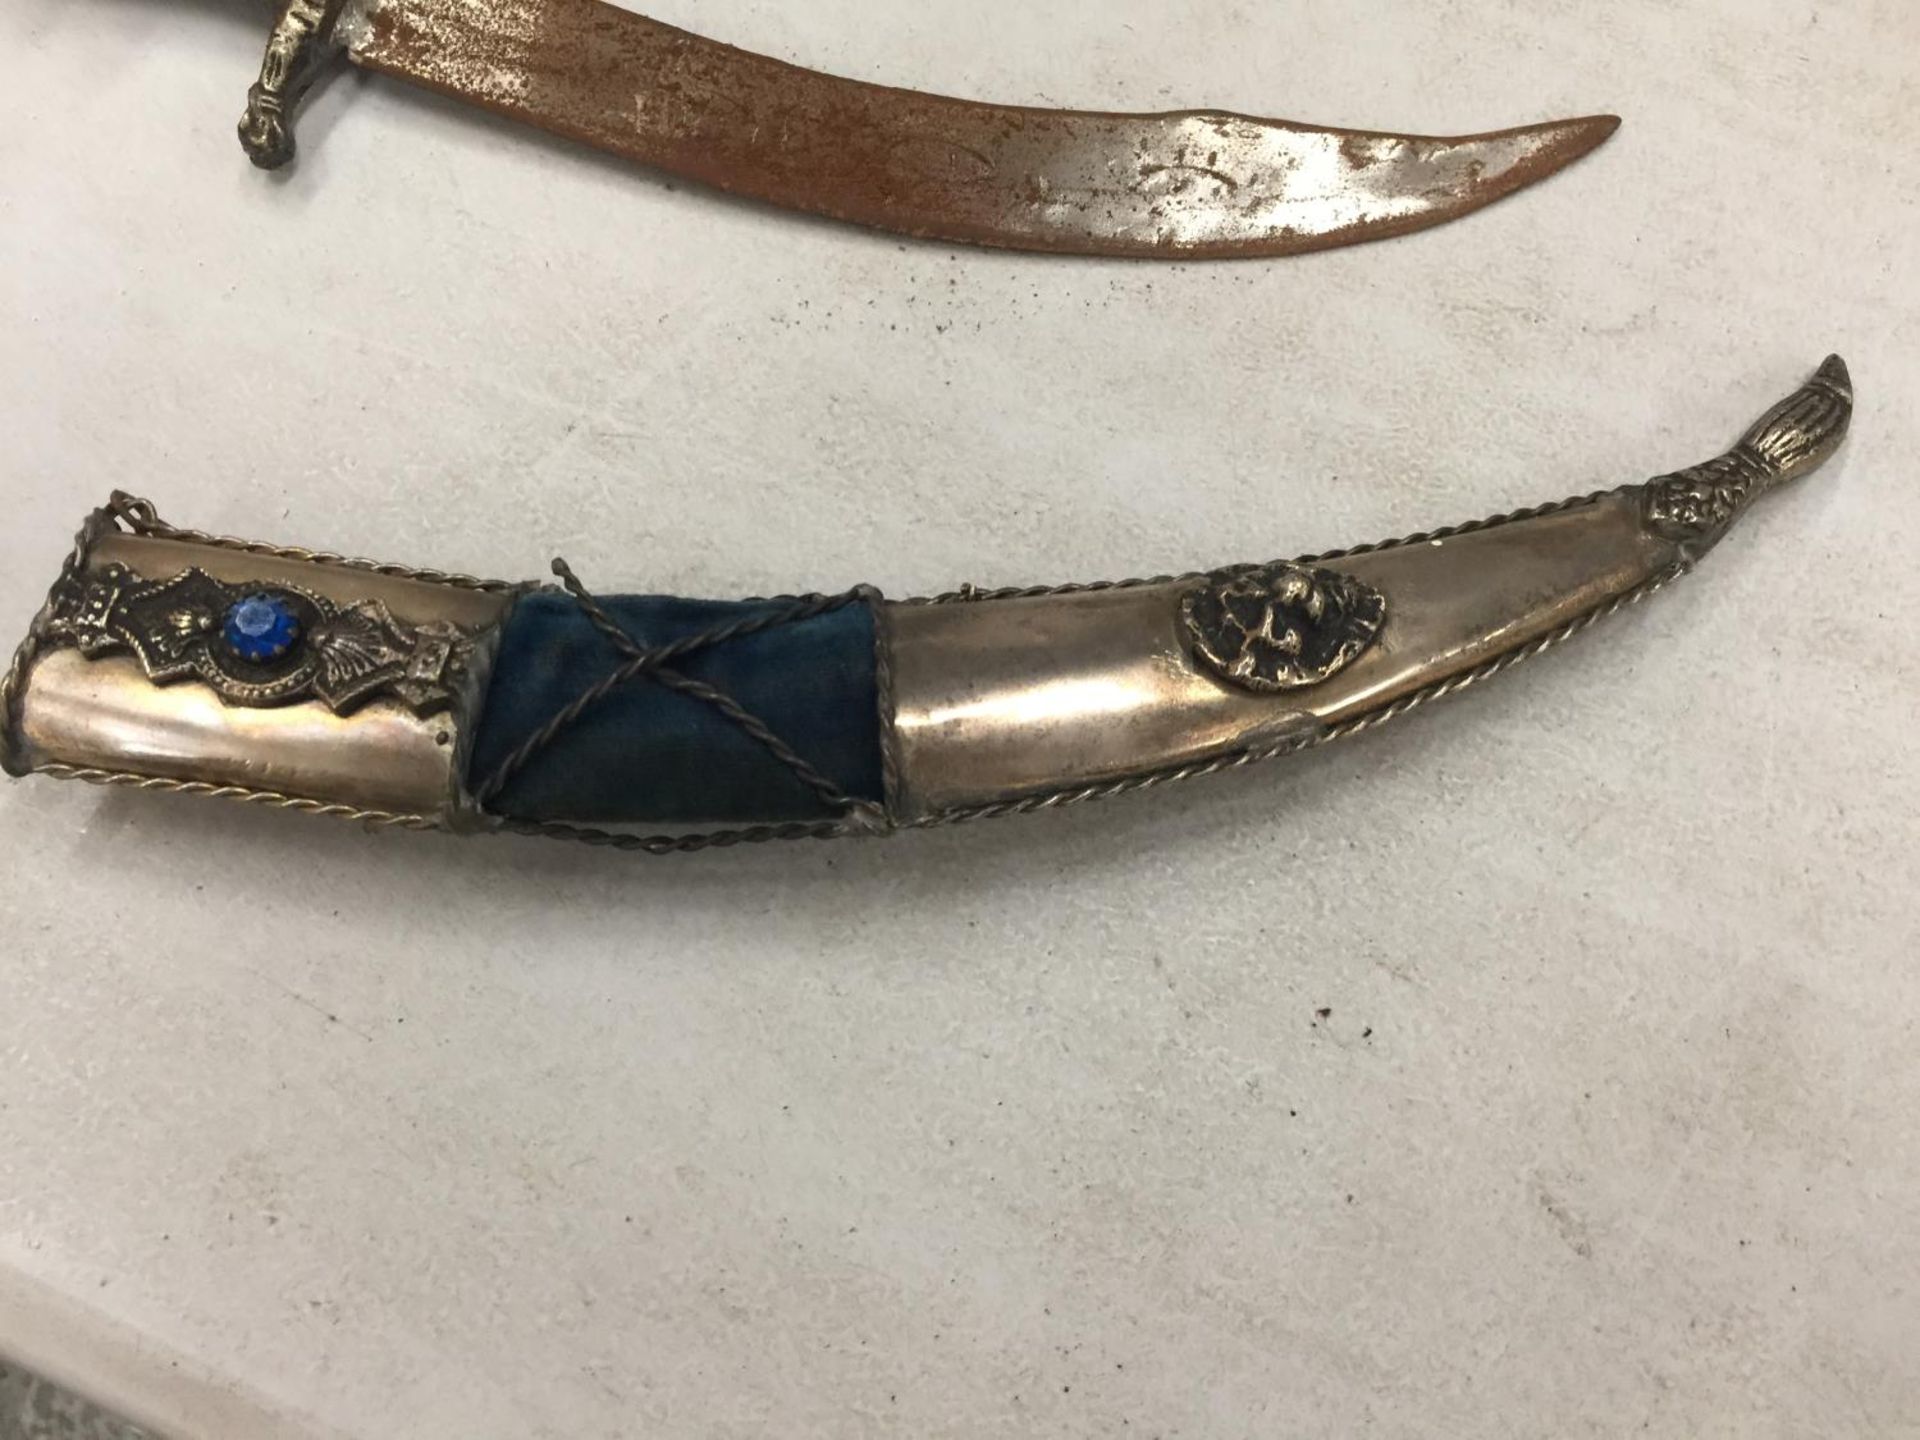 A DECORATIVE CURVED BLADE DAGGER AND SHEATH - Image 2 of 3